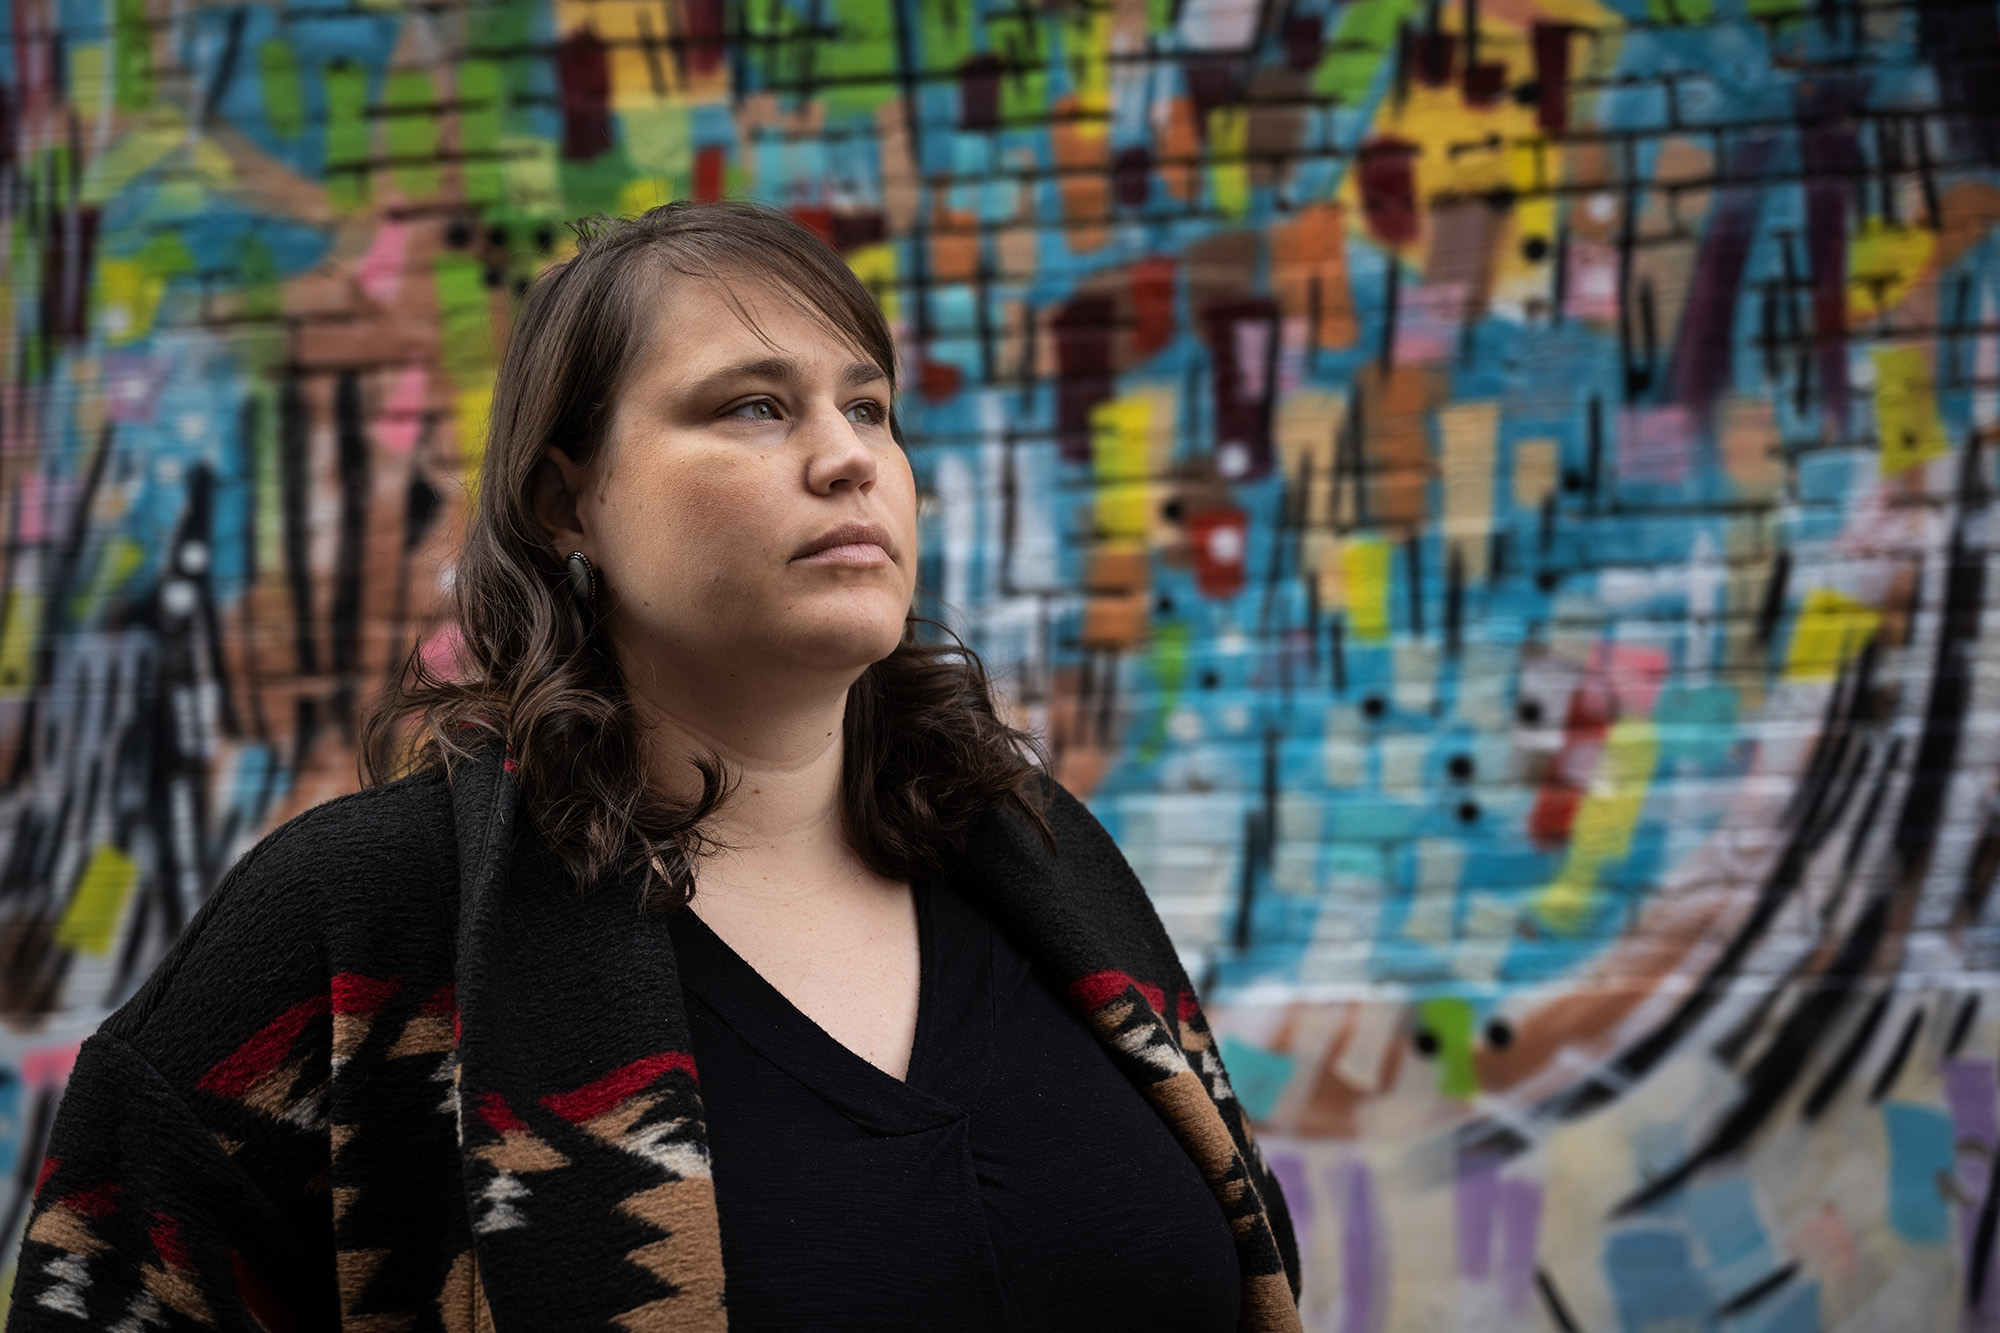 University of Iowa graduate Carrie Schuettpelz looks beyond the frame standing in front of a colorful mural